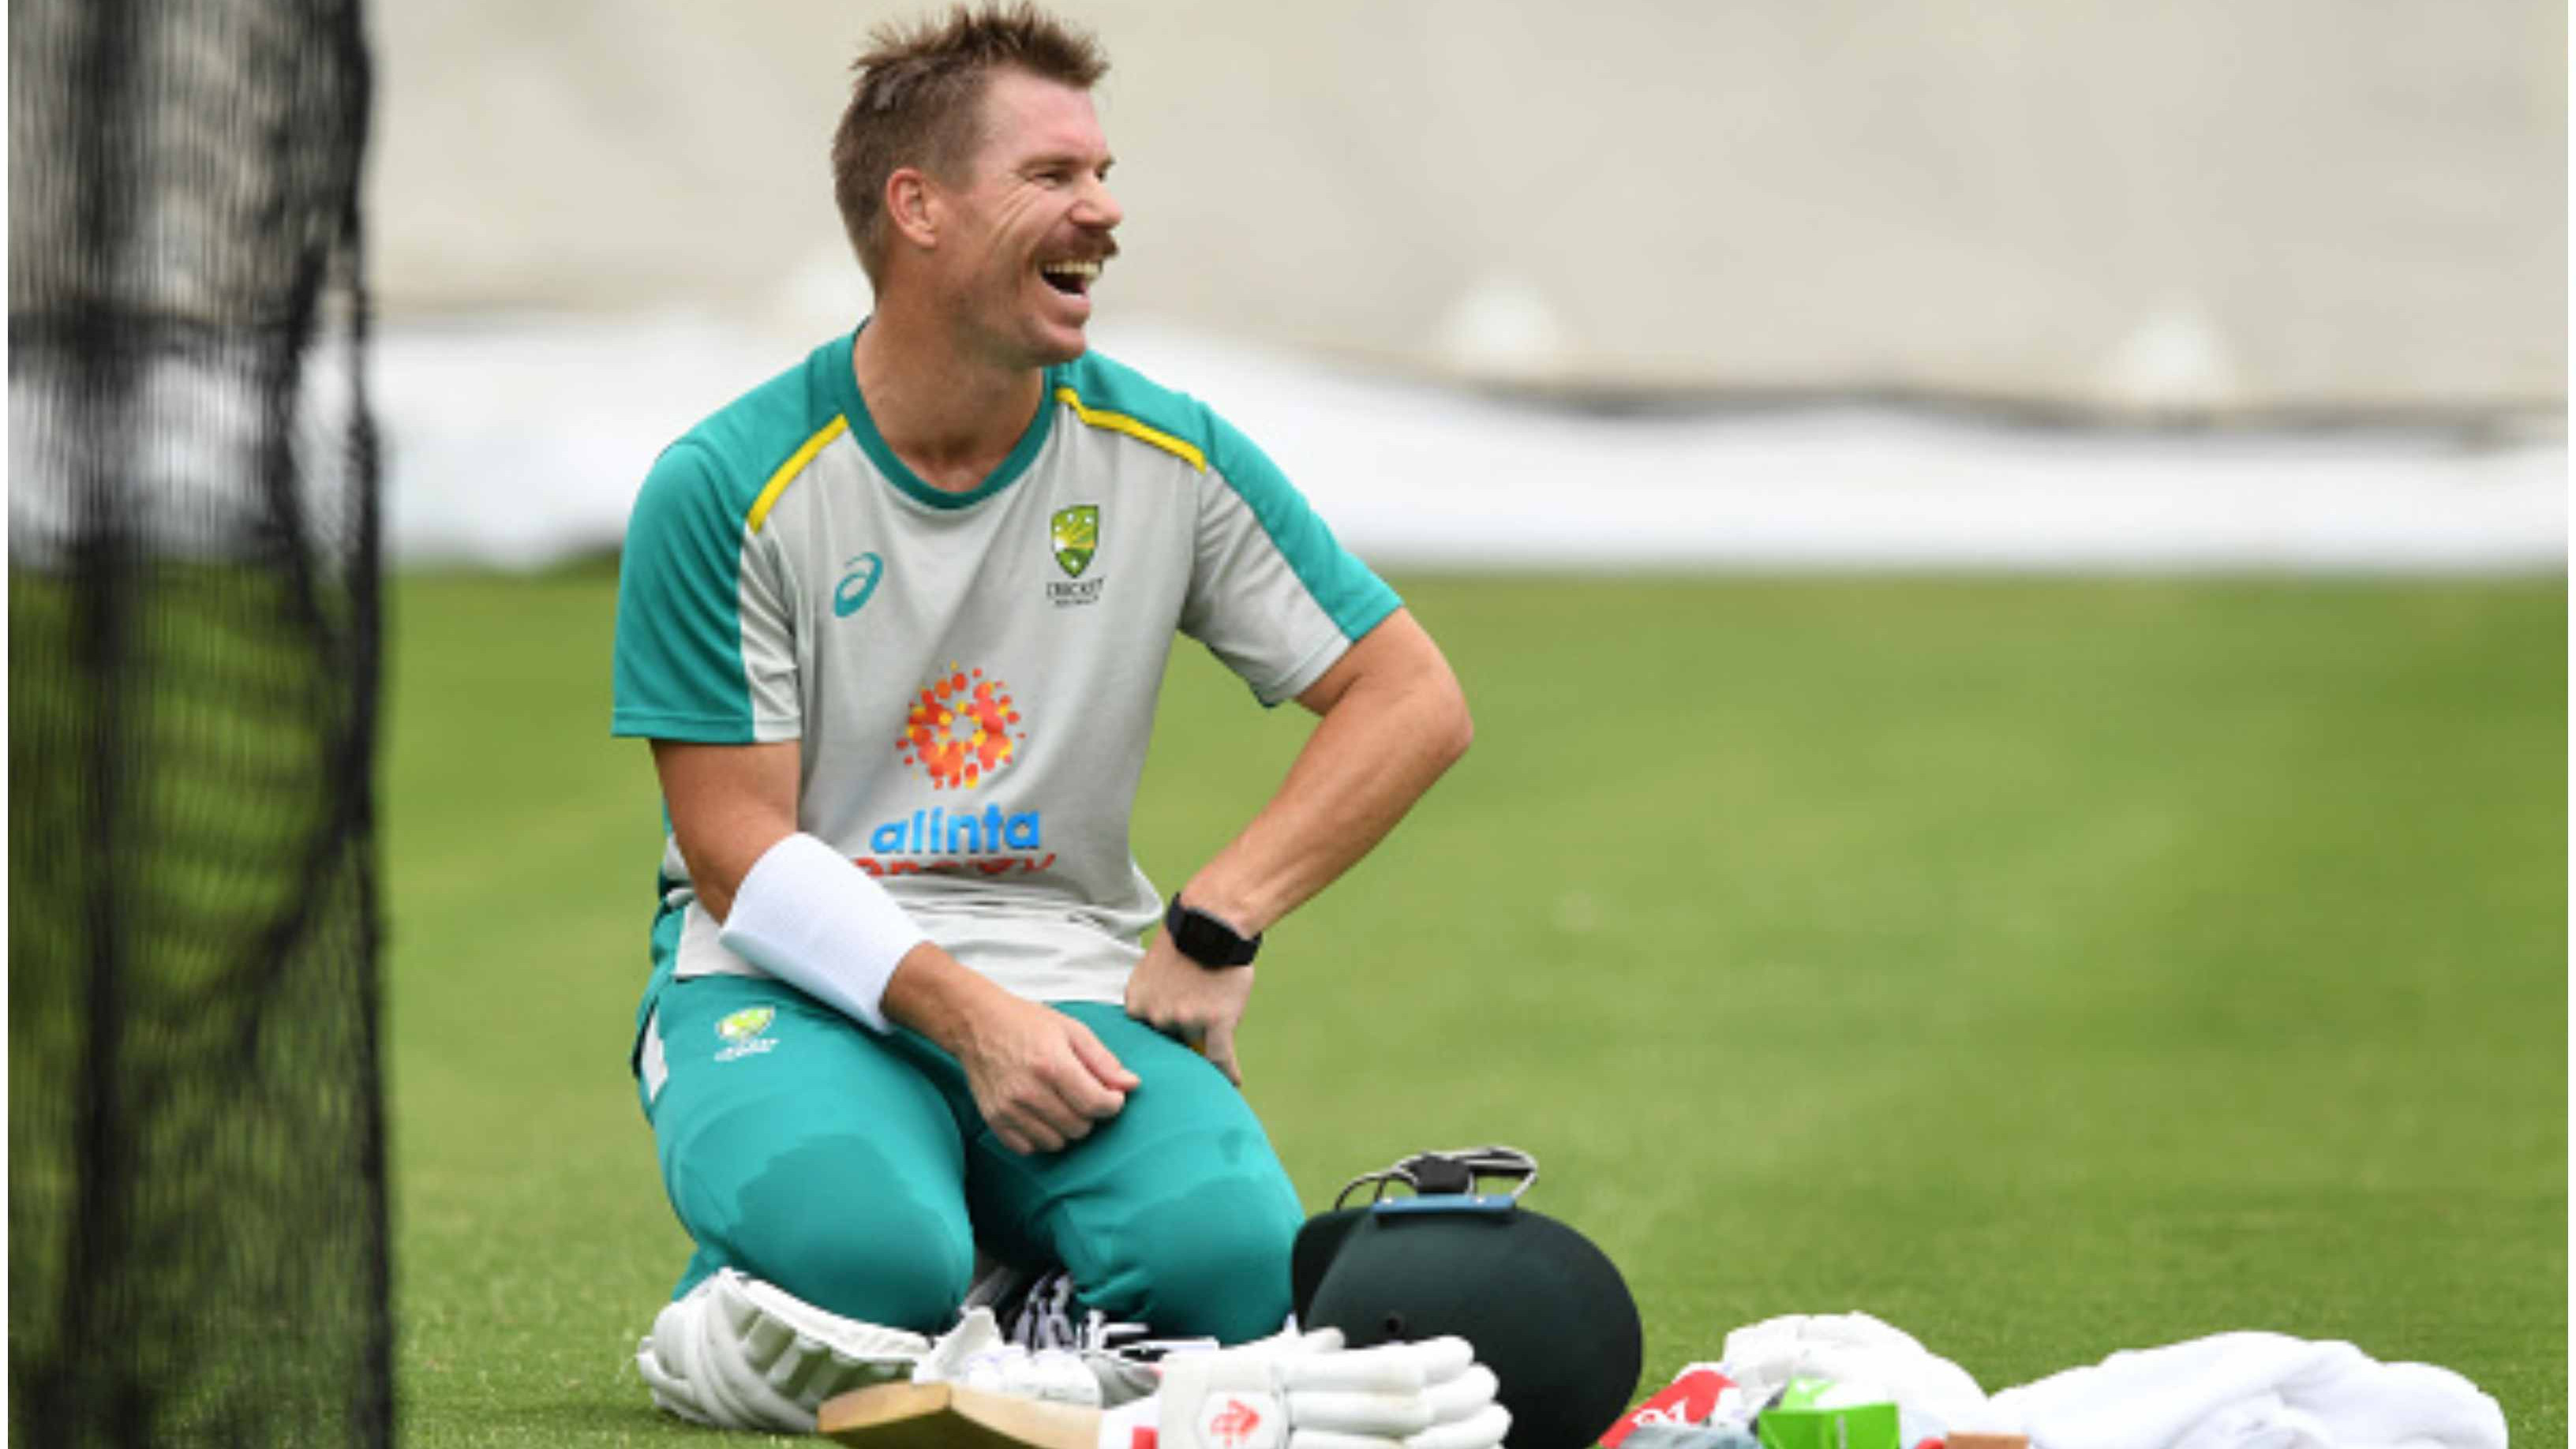 Security staff stops David Warner at Los Angeles airport after scanner shows hotspot on his private parts